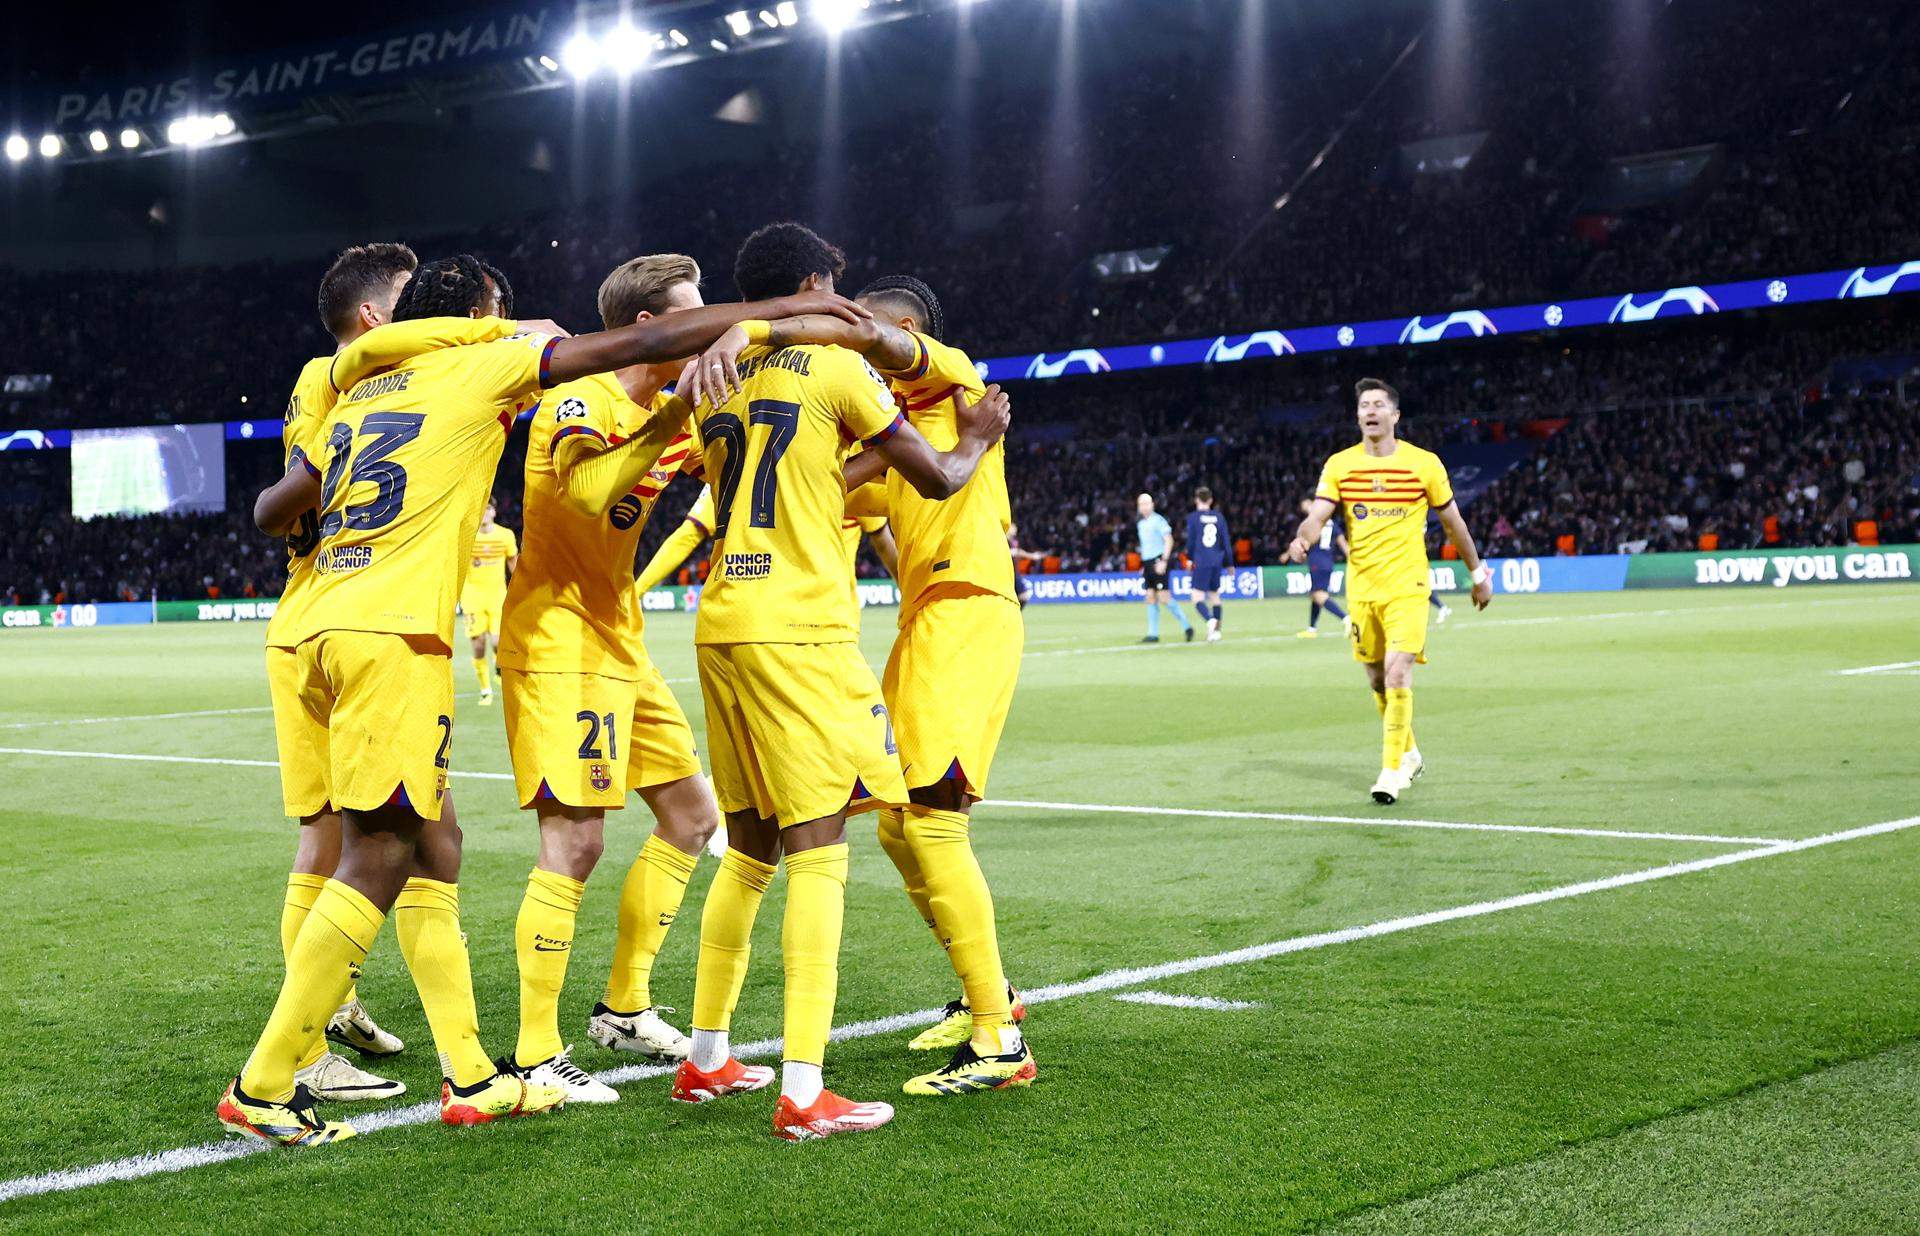 Barça conquer Paris with epic victory against PSG in first leg of Champions quarter-final (2-3)